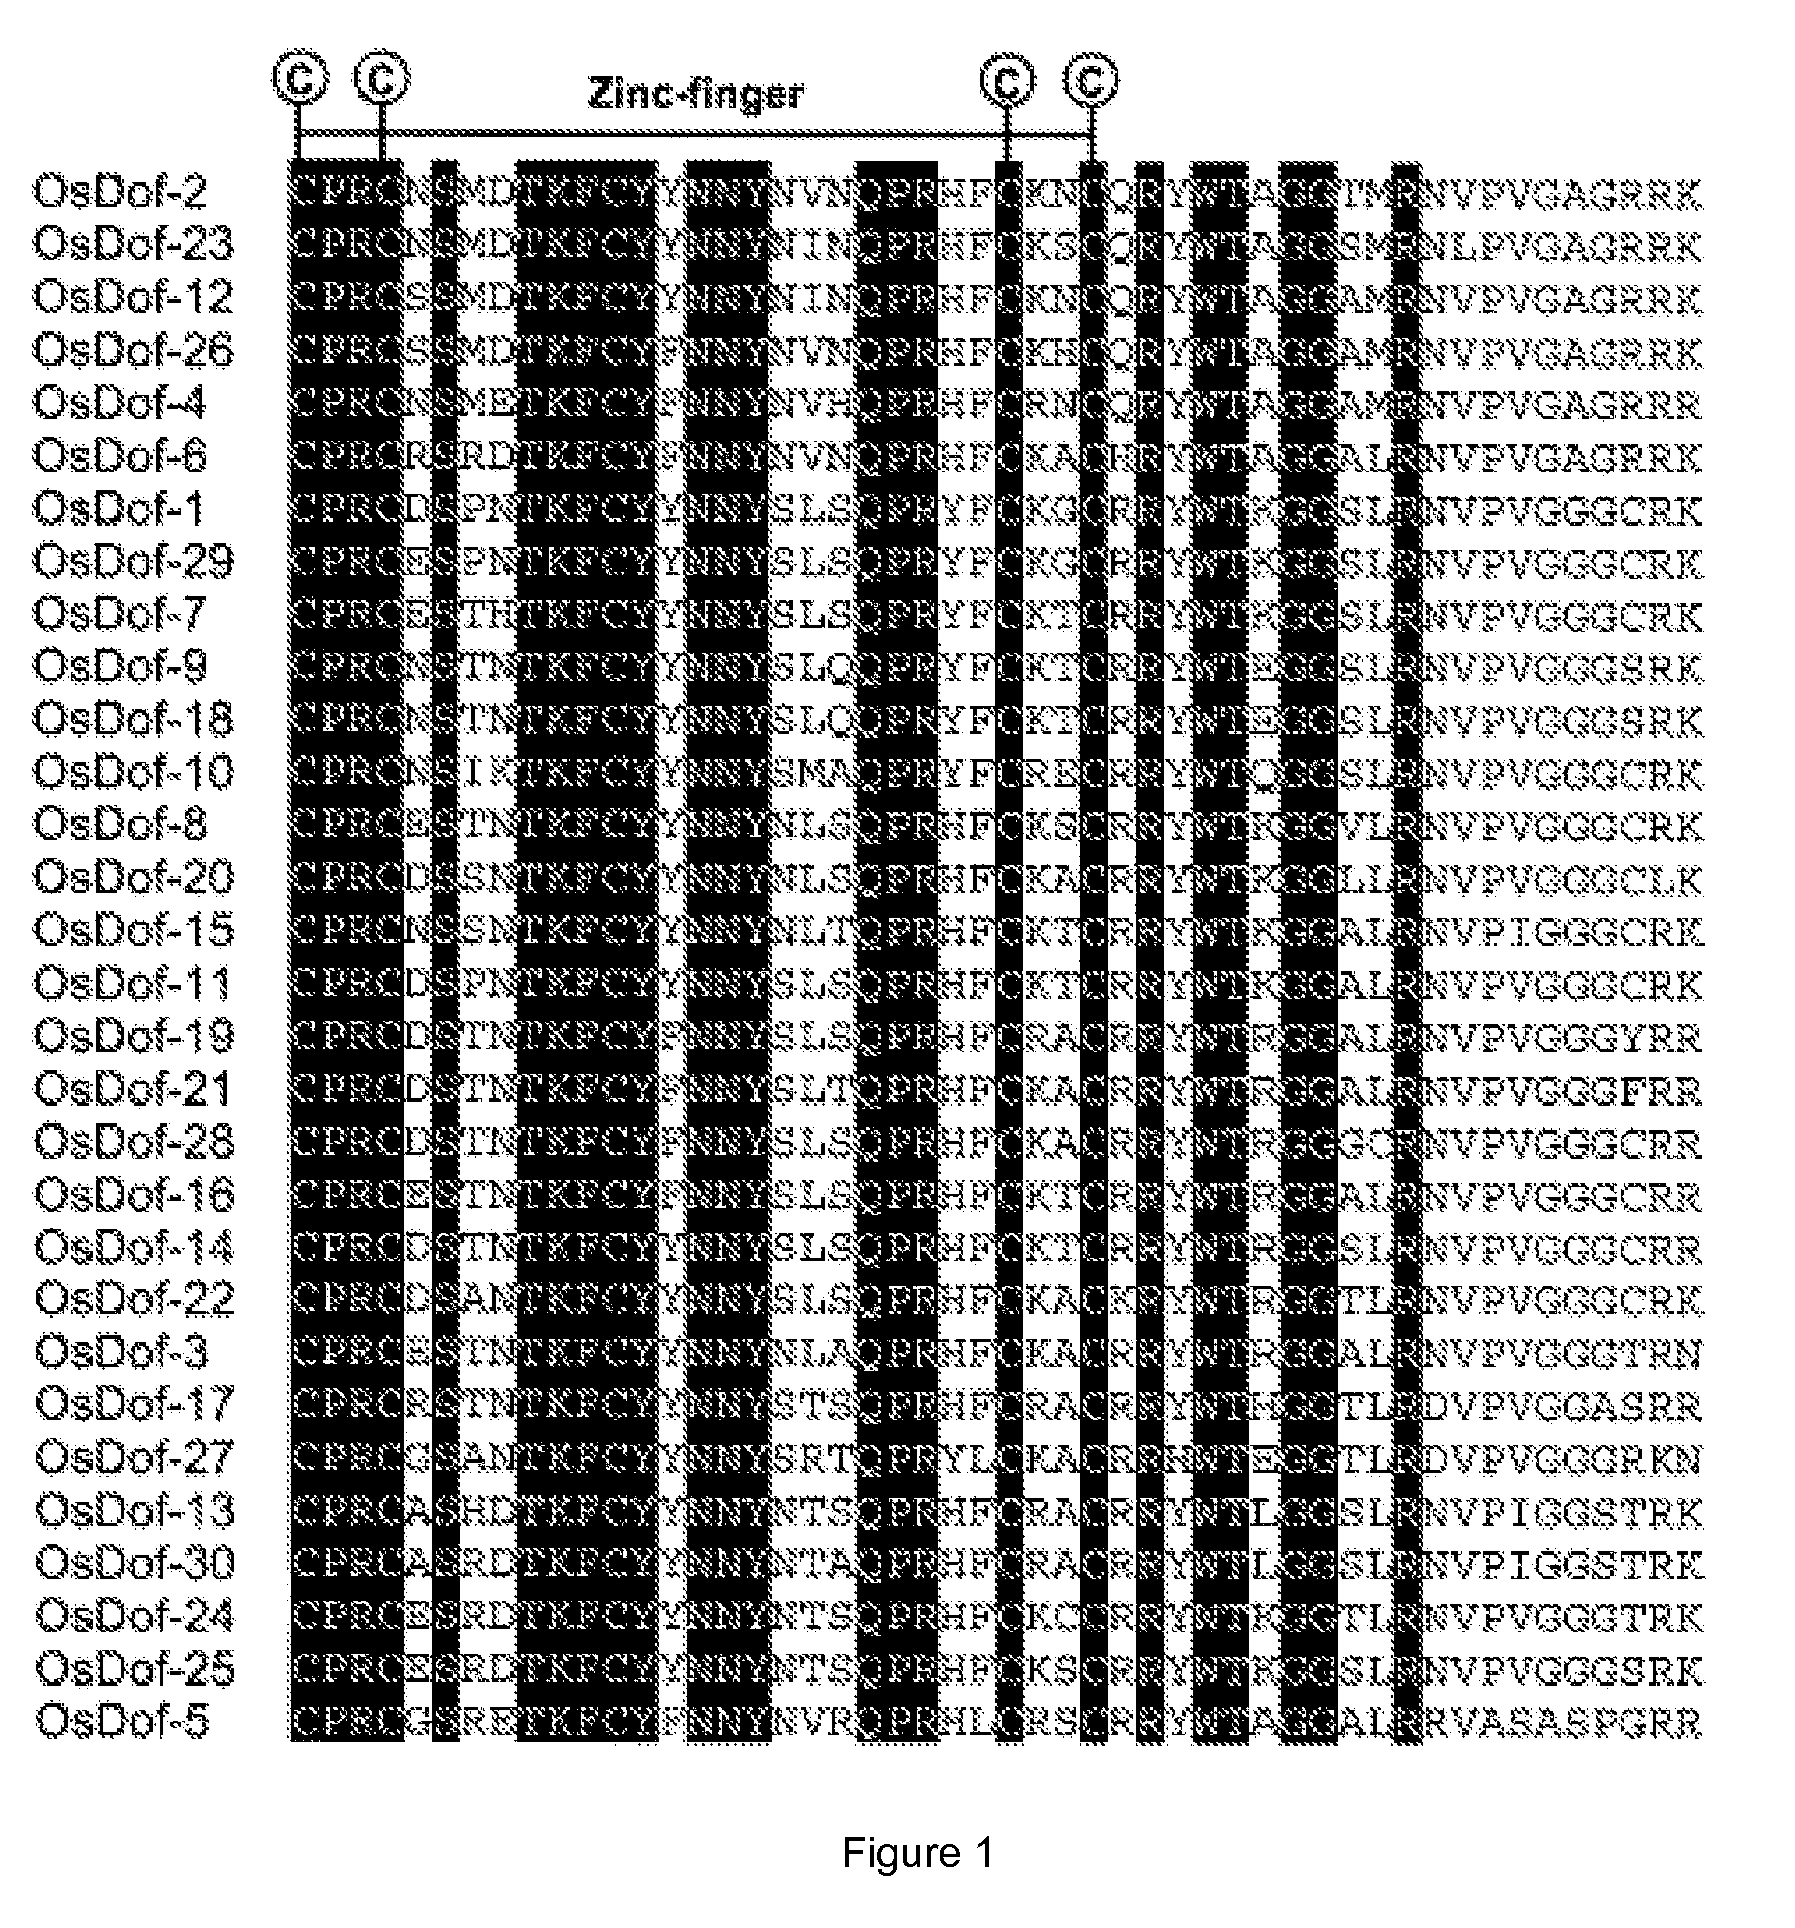 Dof (dna binding with one finger) sequences and methods of use